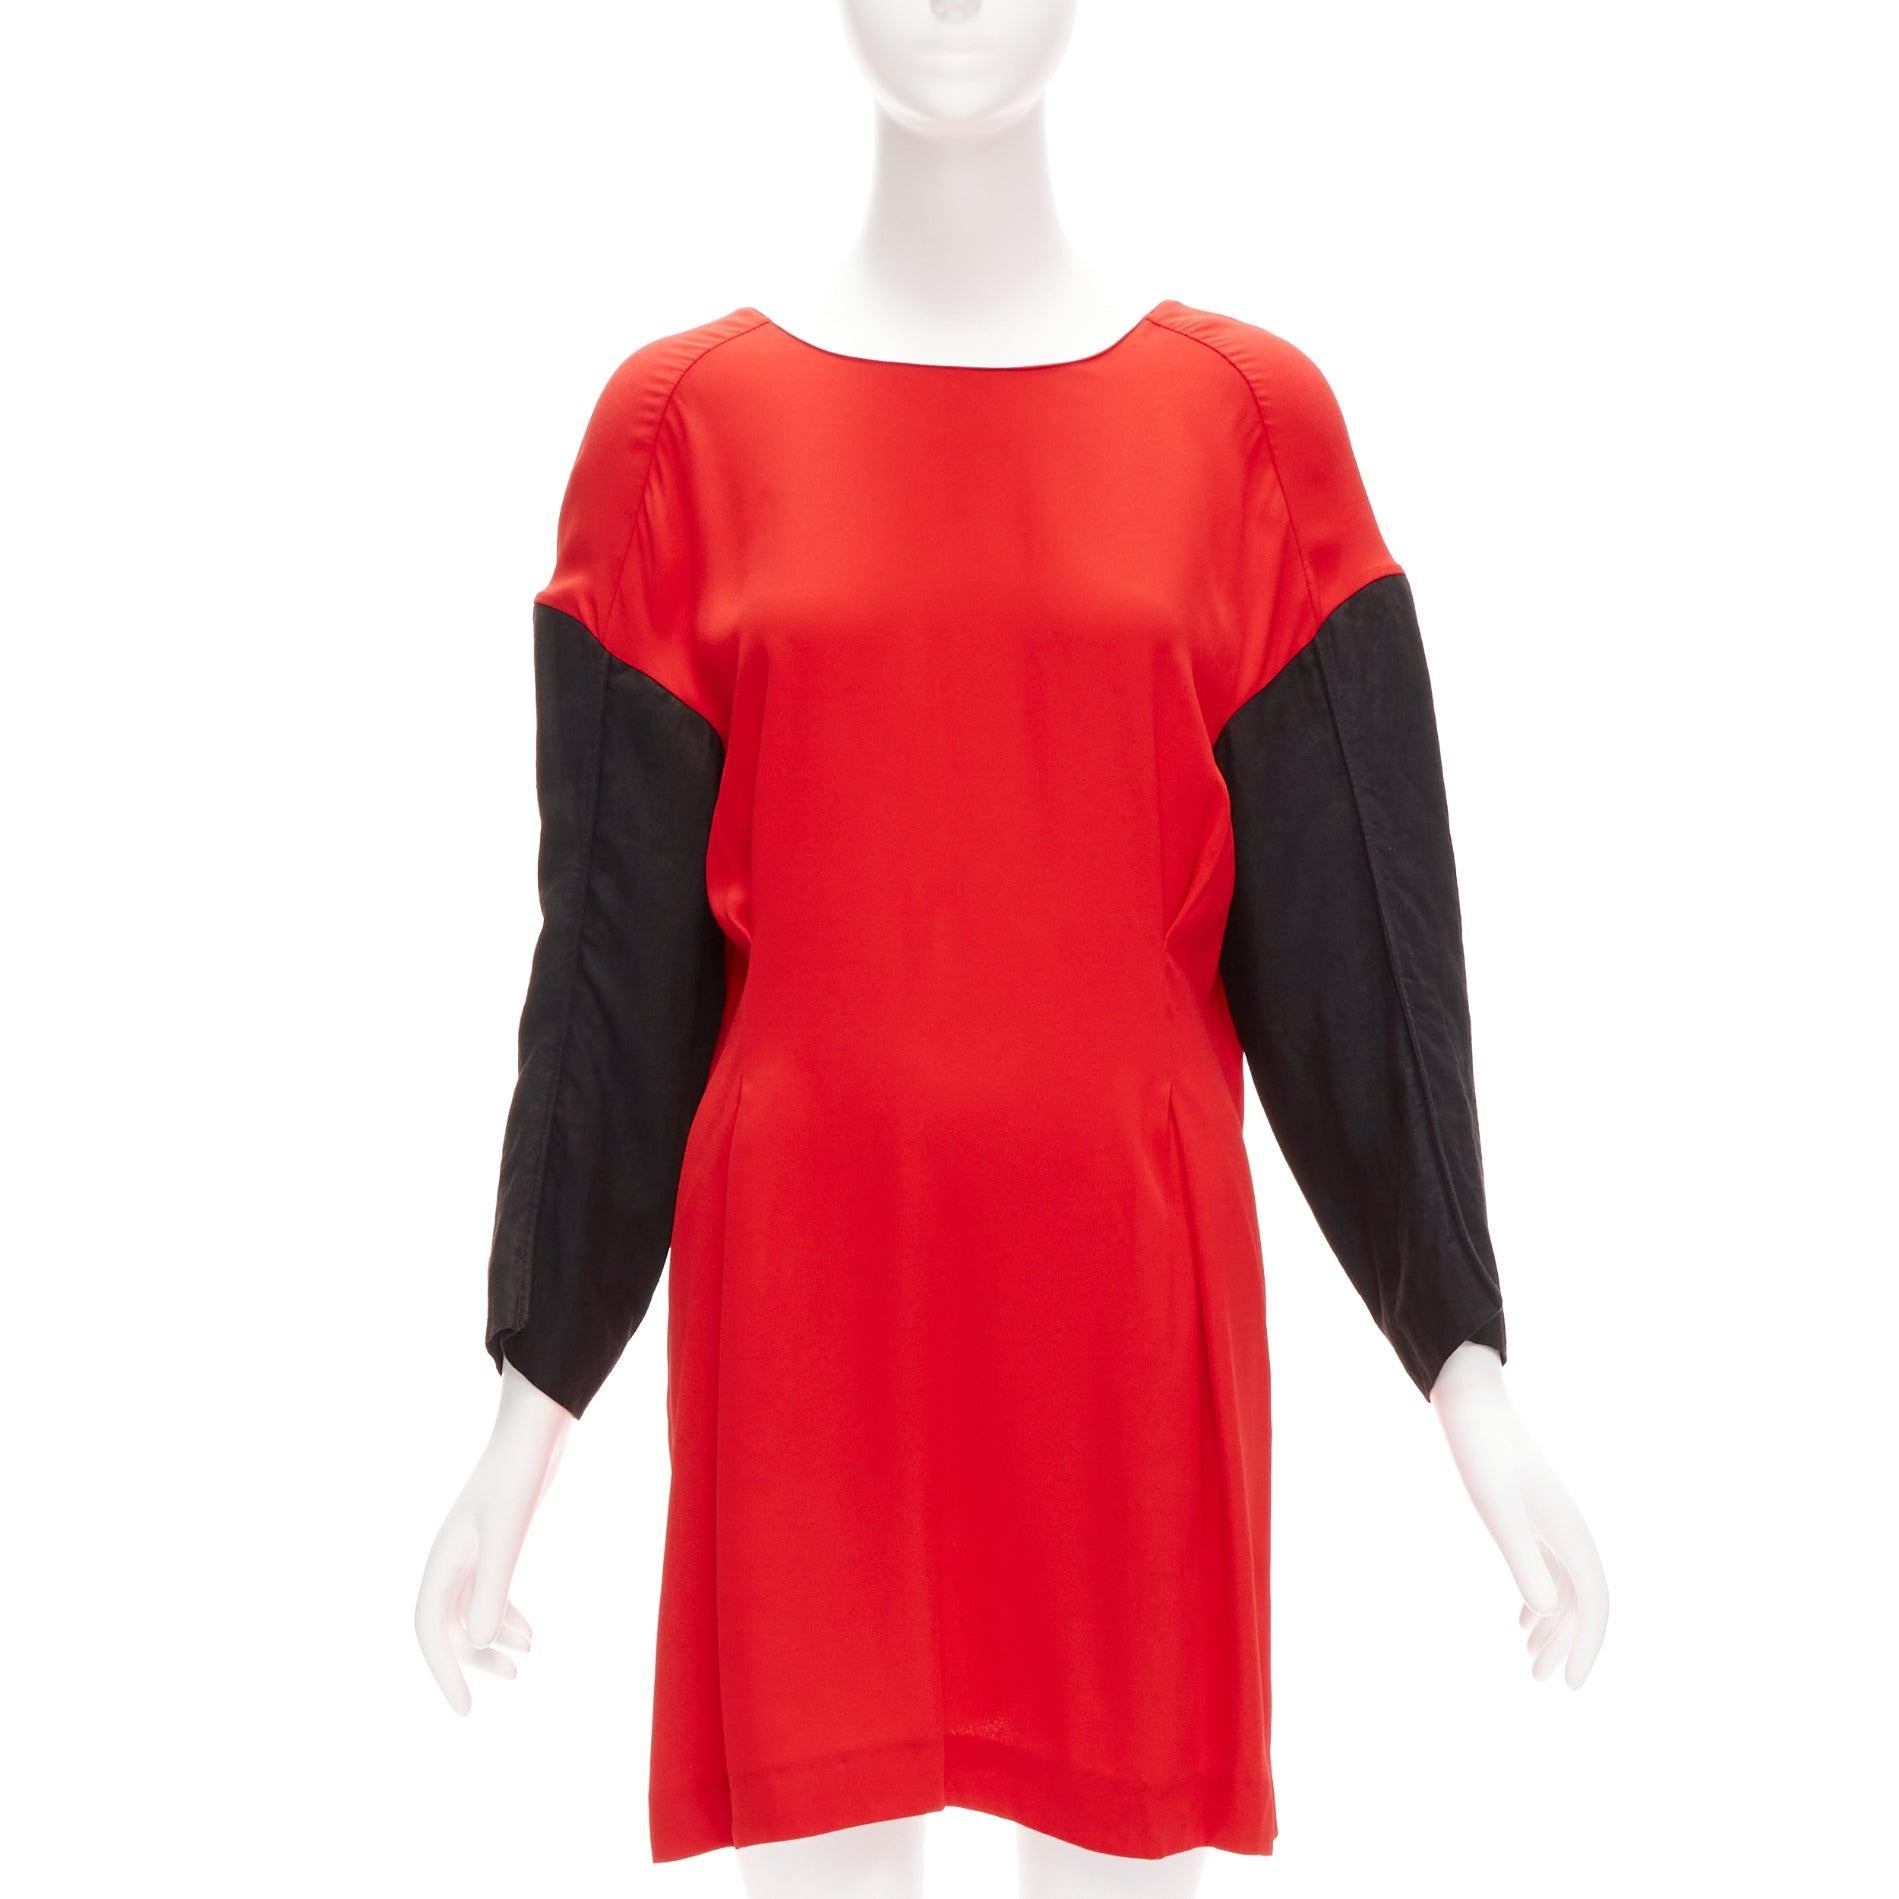 MARNI red black contrast cutout armhole bateau tie back mini dress IT38 XS
Reference: CELG/A00289
Brand: Marni
Material: Viscose, Blend
Color: Red, Black
Pattern: Solid
Closure: Self Tie
Extra Details: Tie back with cutout armholes design.
Made in: